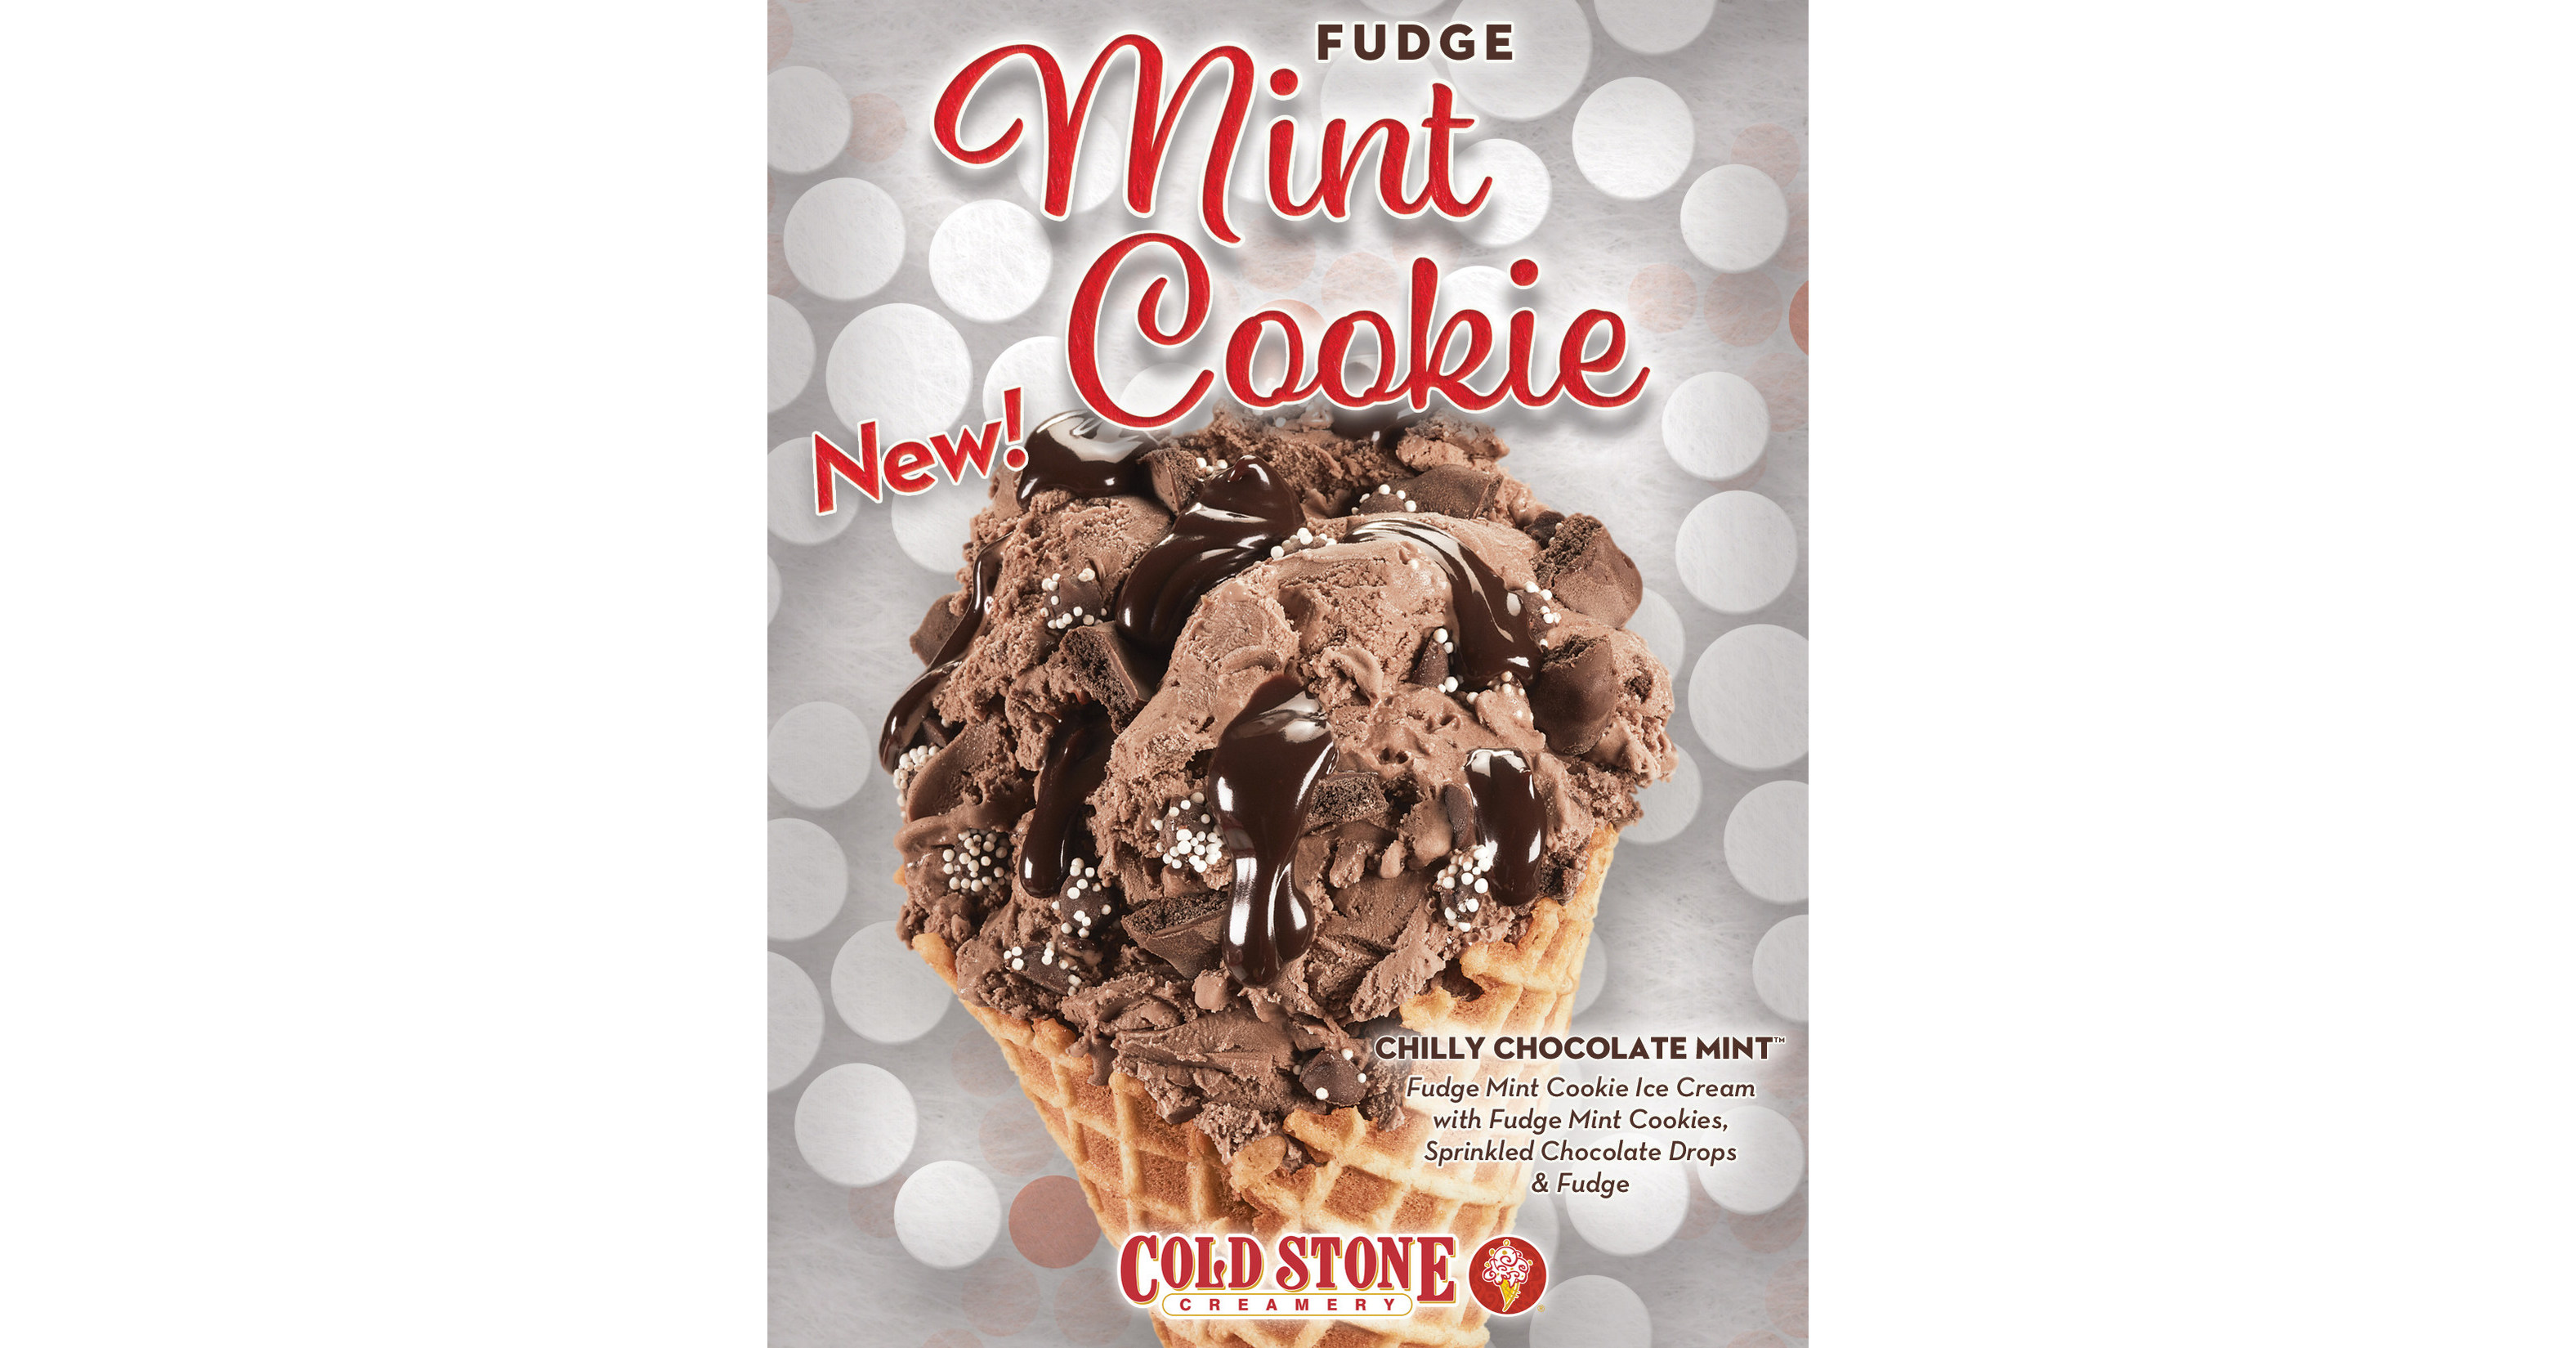 Cold Stone Creamery Continues the Holiday Celebration with New Flavor